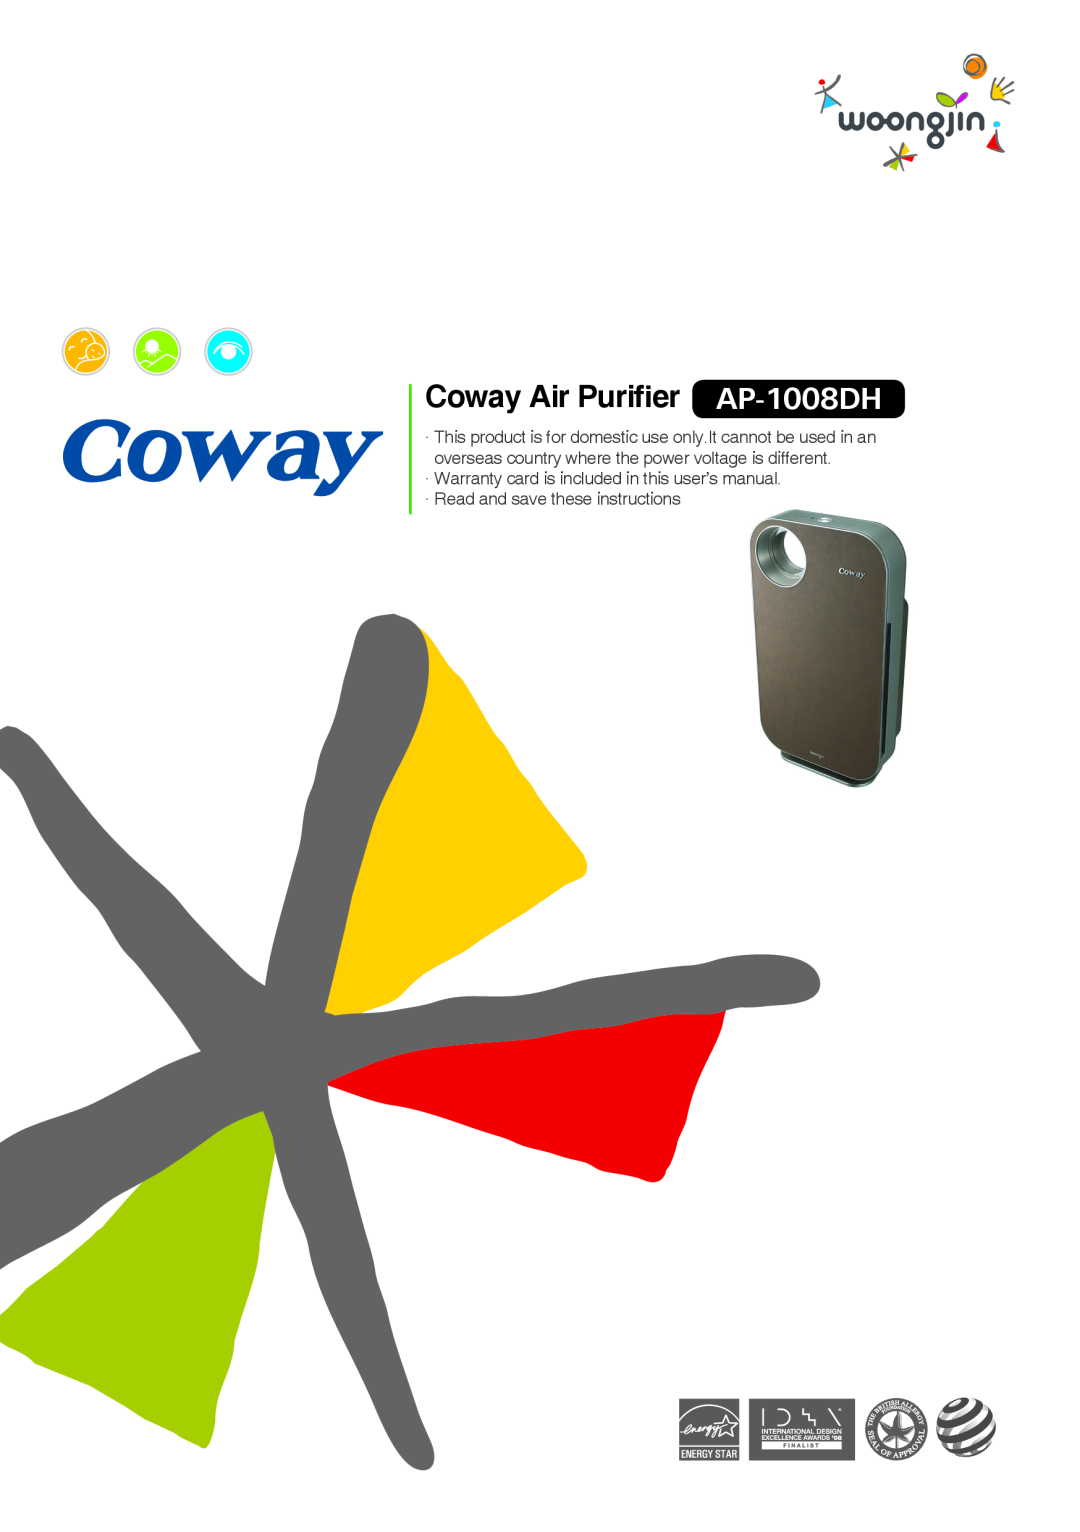 NewAir warranty Coway Air Purifier AP-1008DH, ·Read and save these instructions 